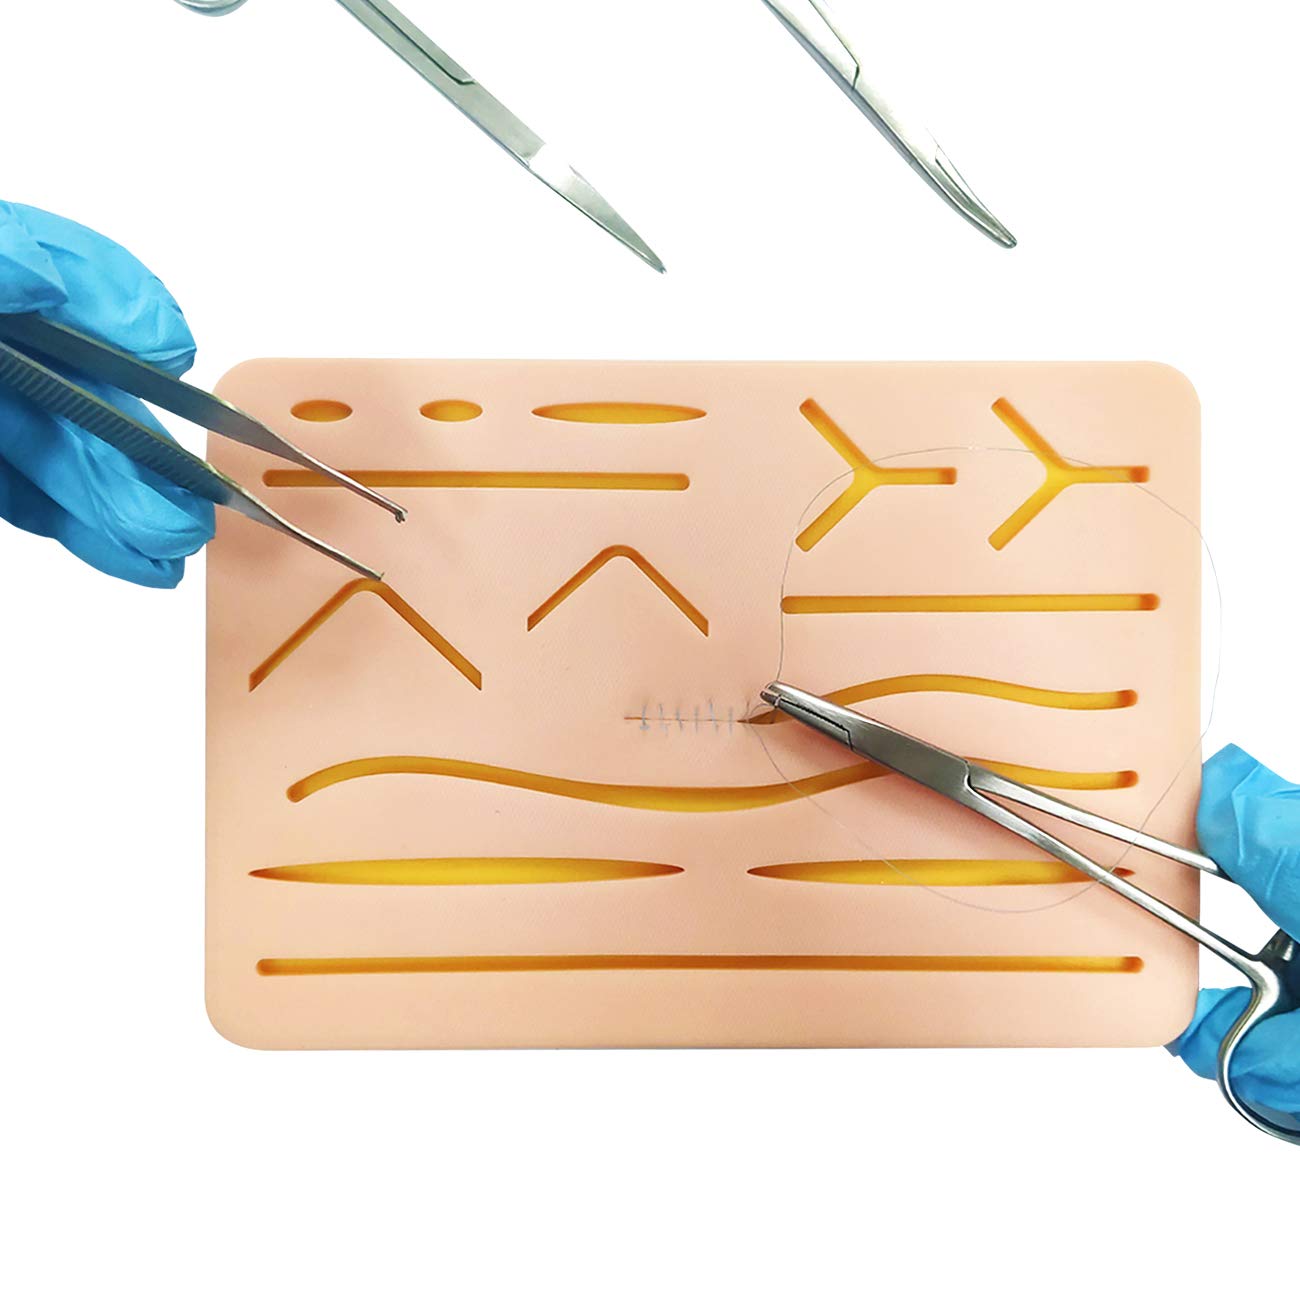 Complete Suture Practice Kit with Skin Pad,